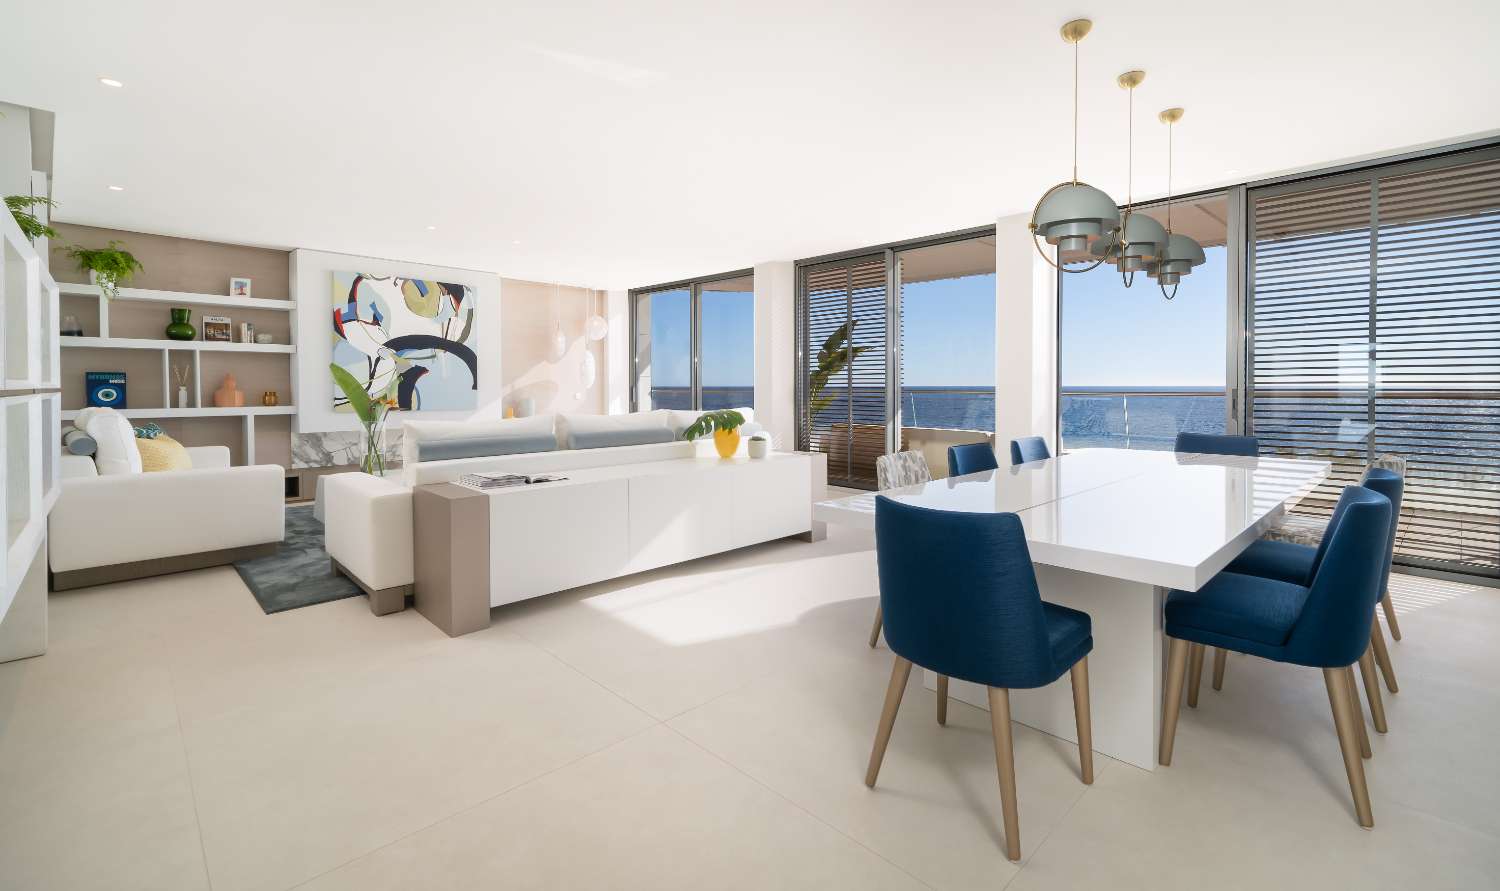 Fabulous duplex 4 Bedroom Penthouse with panoramic sea views. Interior Design by Aalto included in price.